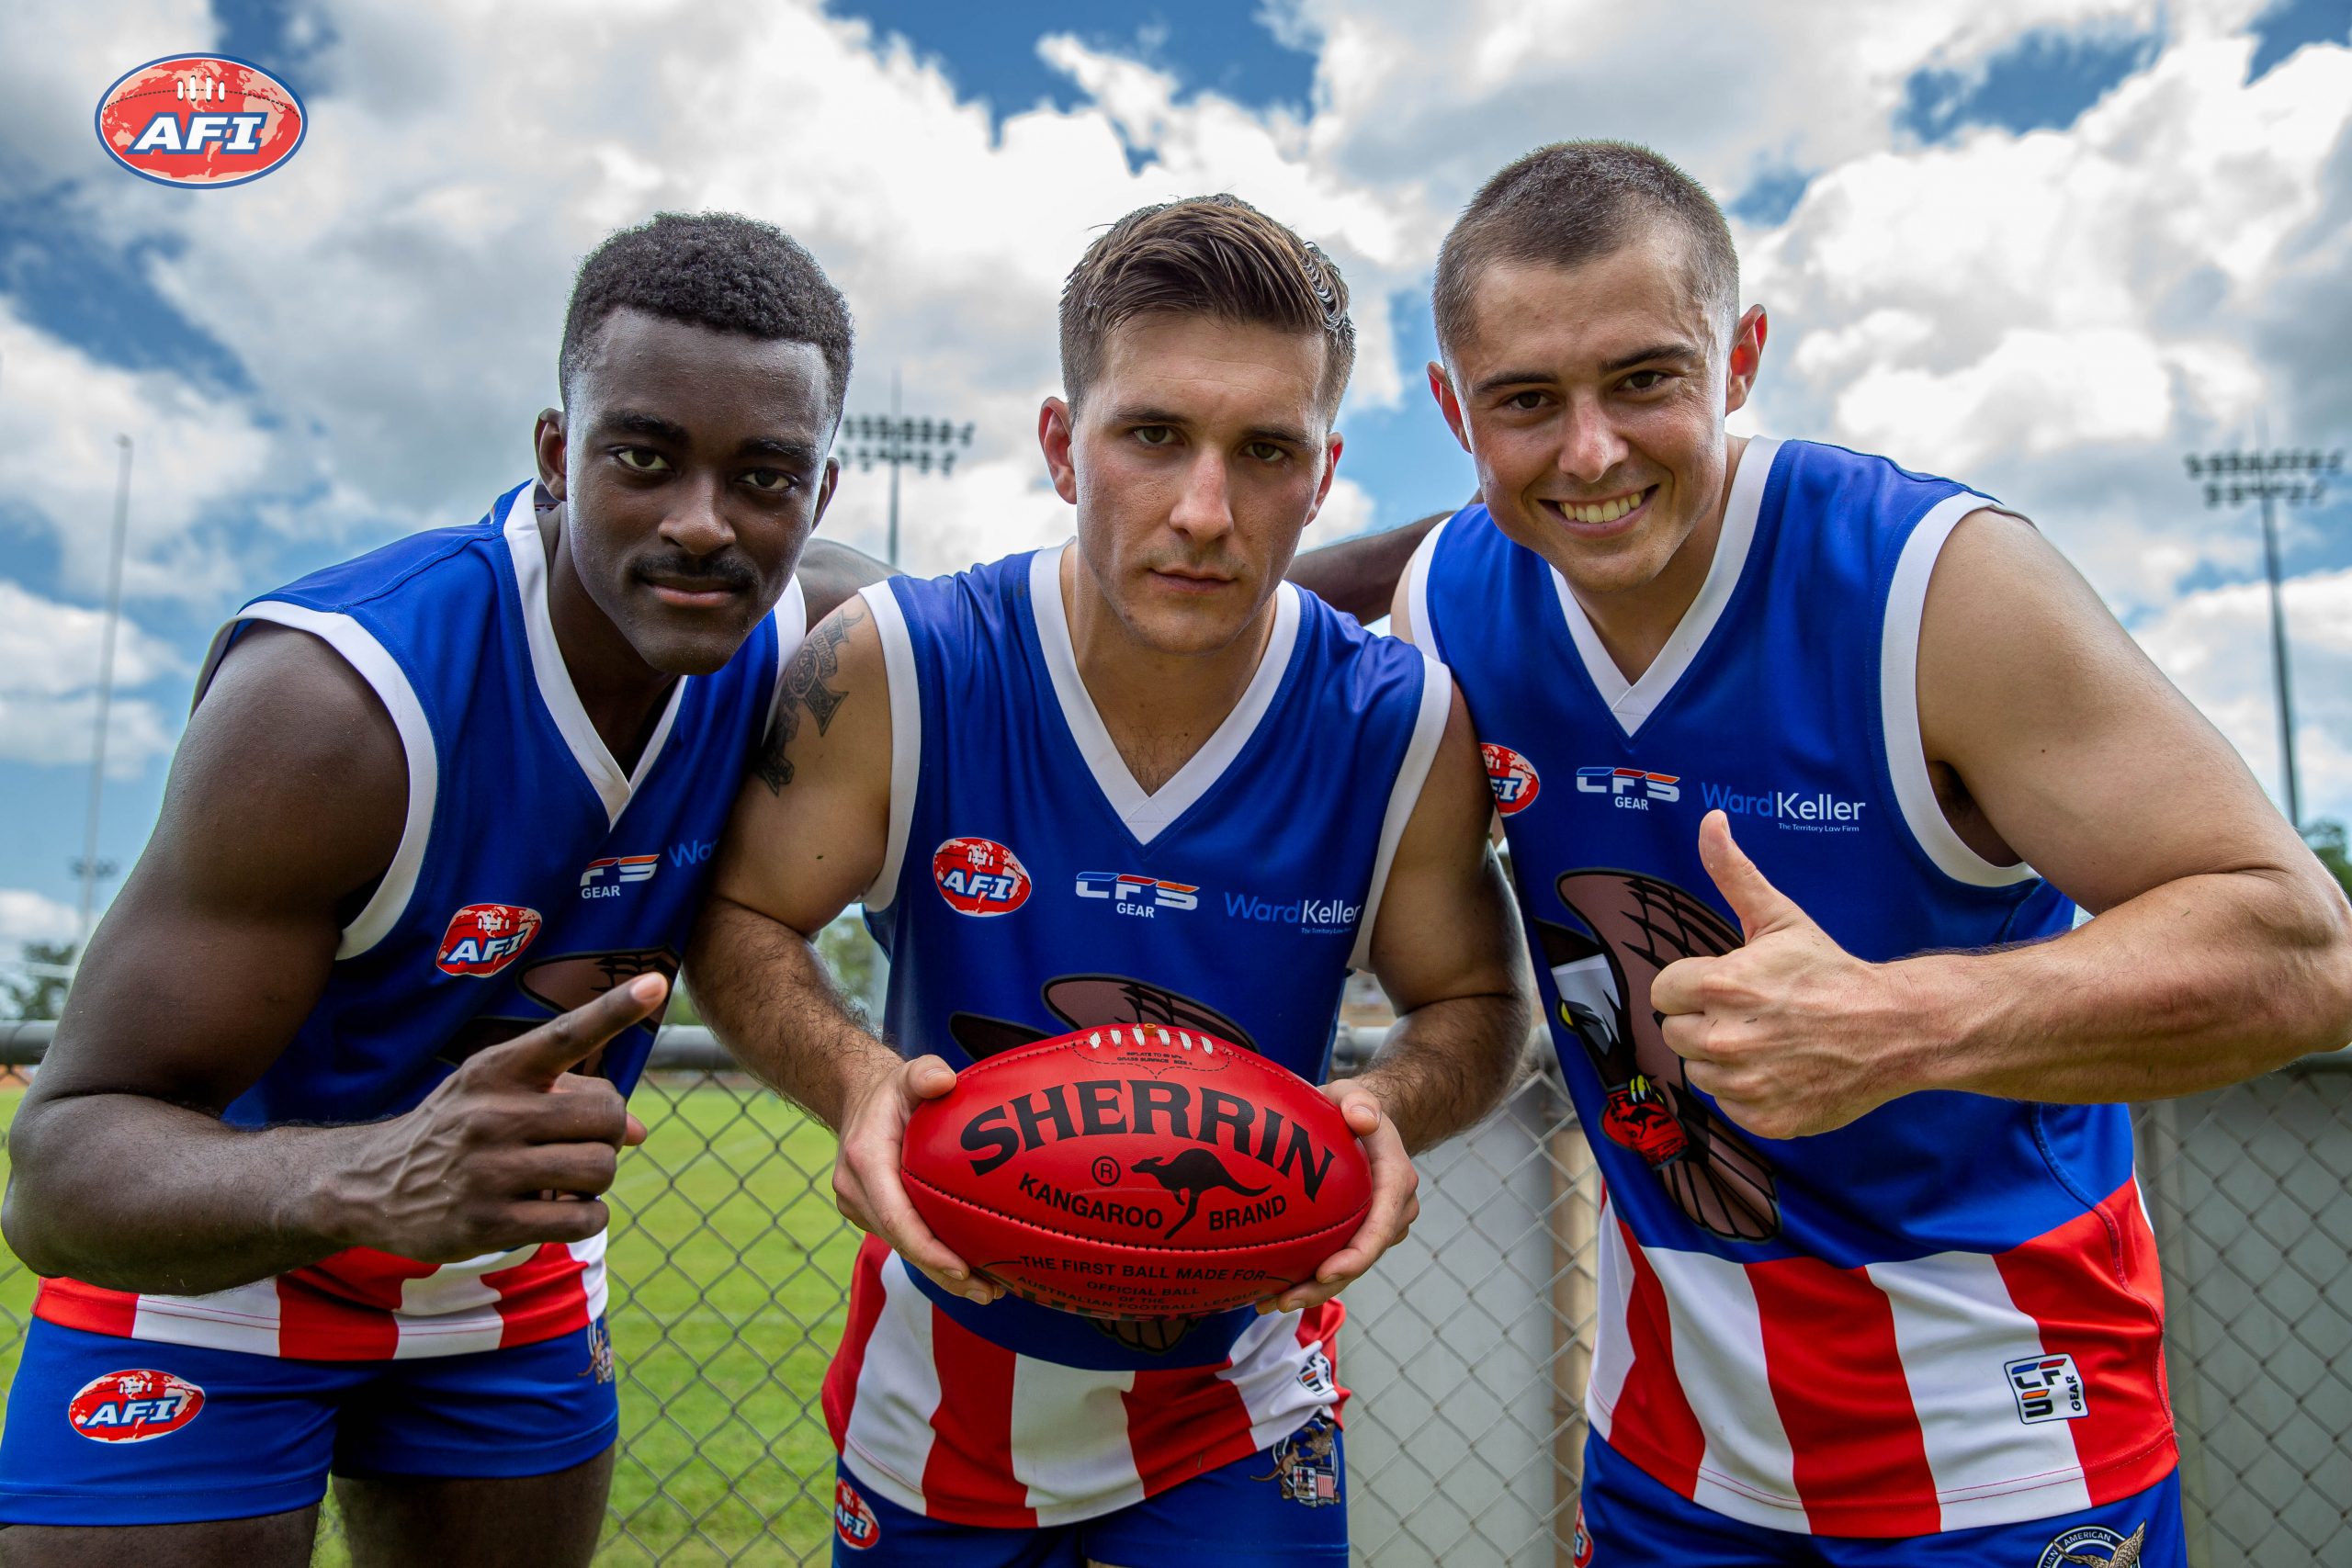 Footy gone worldwide: The competition looking to take Aussie Rules global